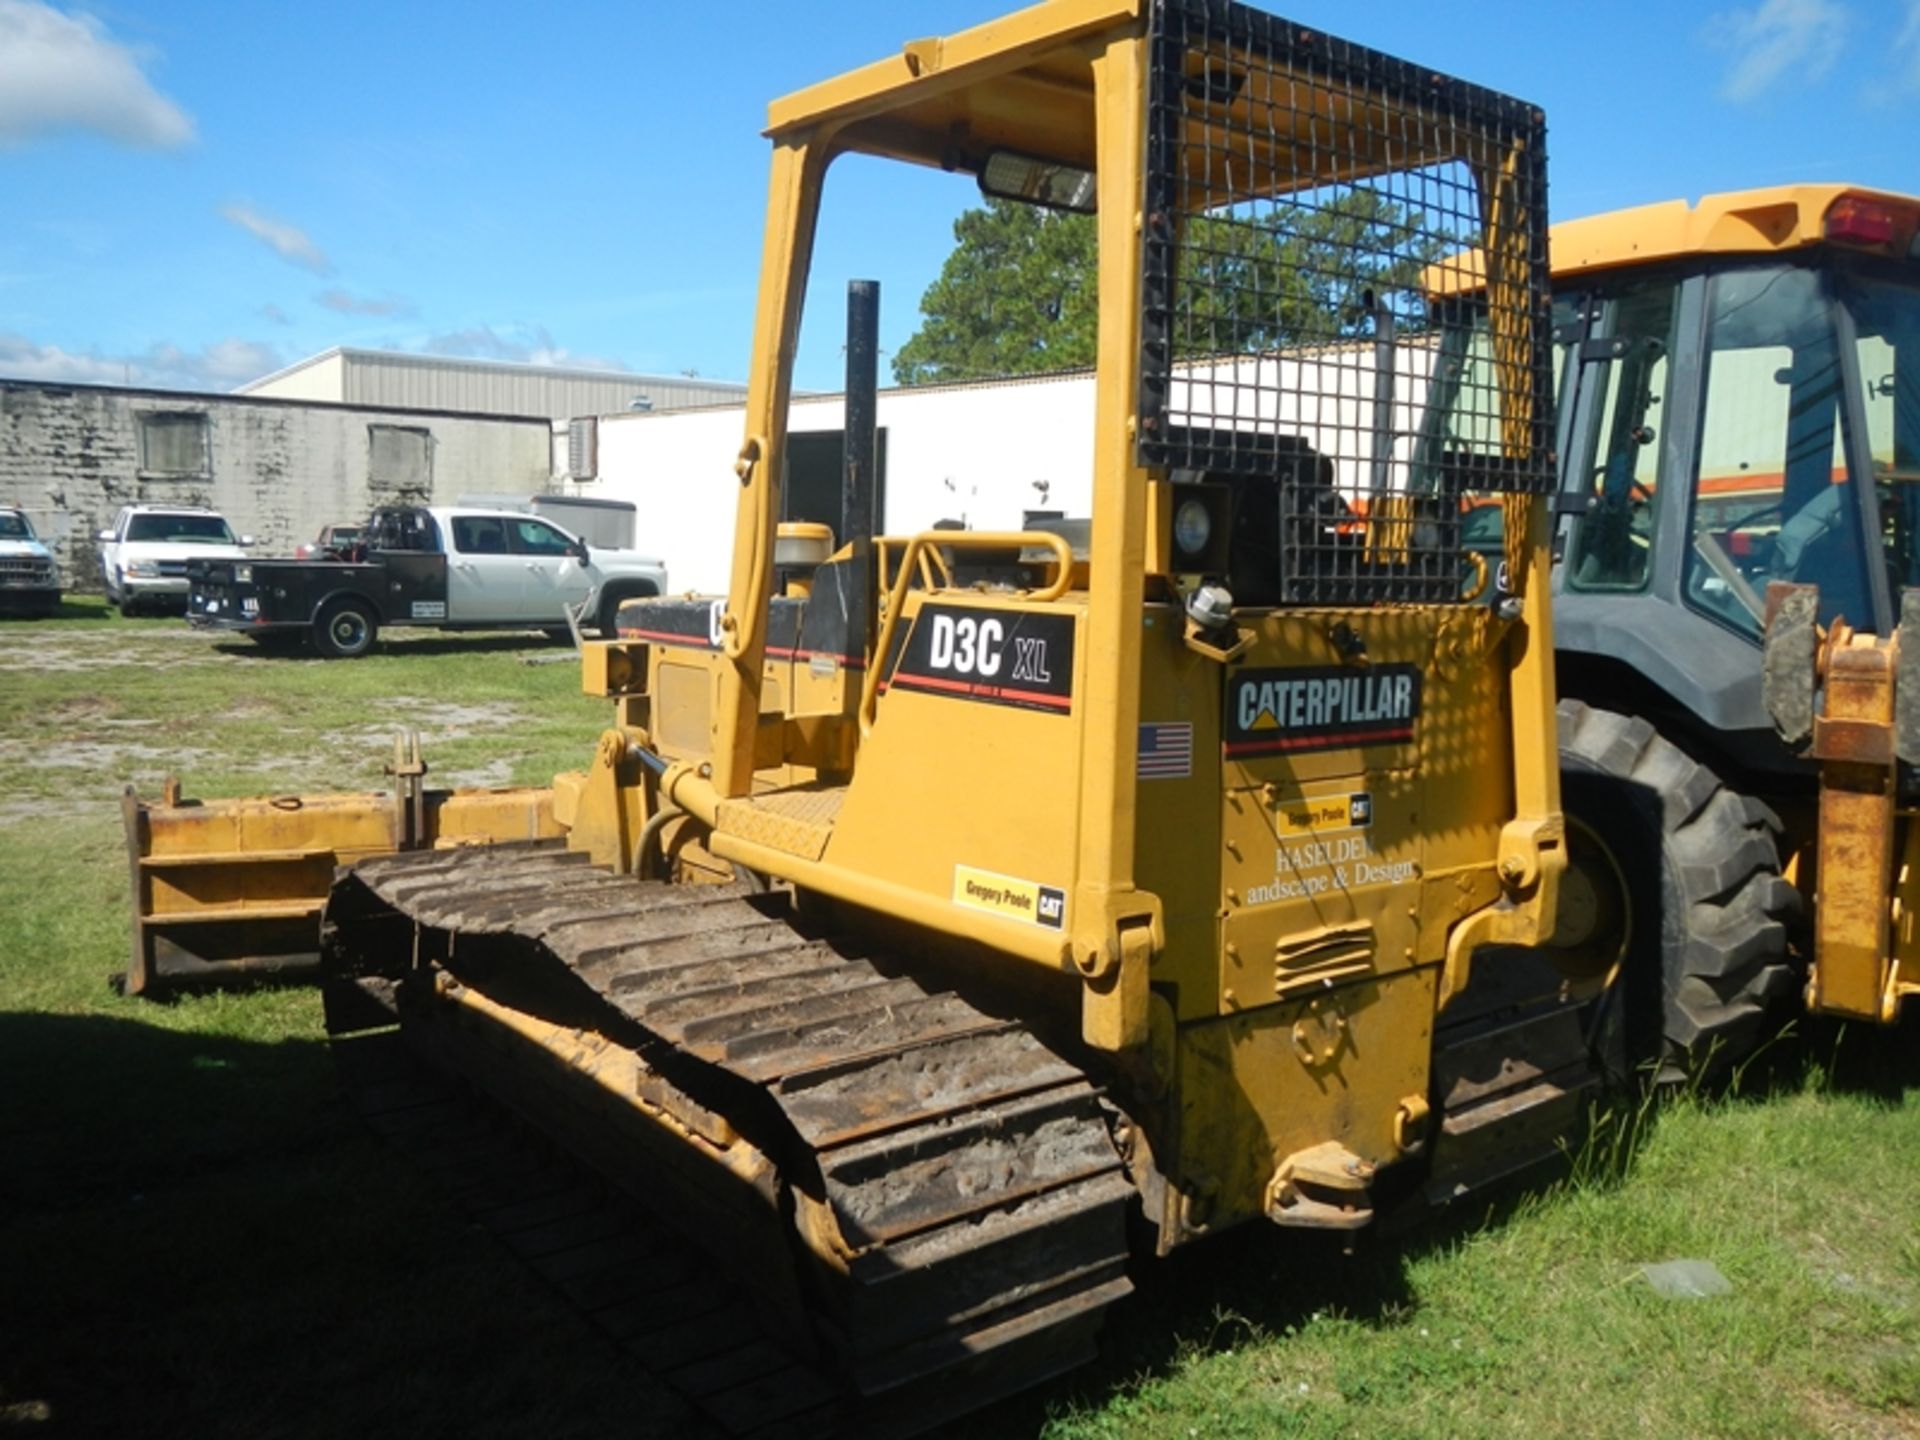 CAT D3B bulldozer, 6-way blade, good undercarriage - SERIAL 24Y01569Hrs unknown new guage - Image 4 of 7